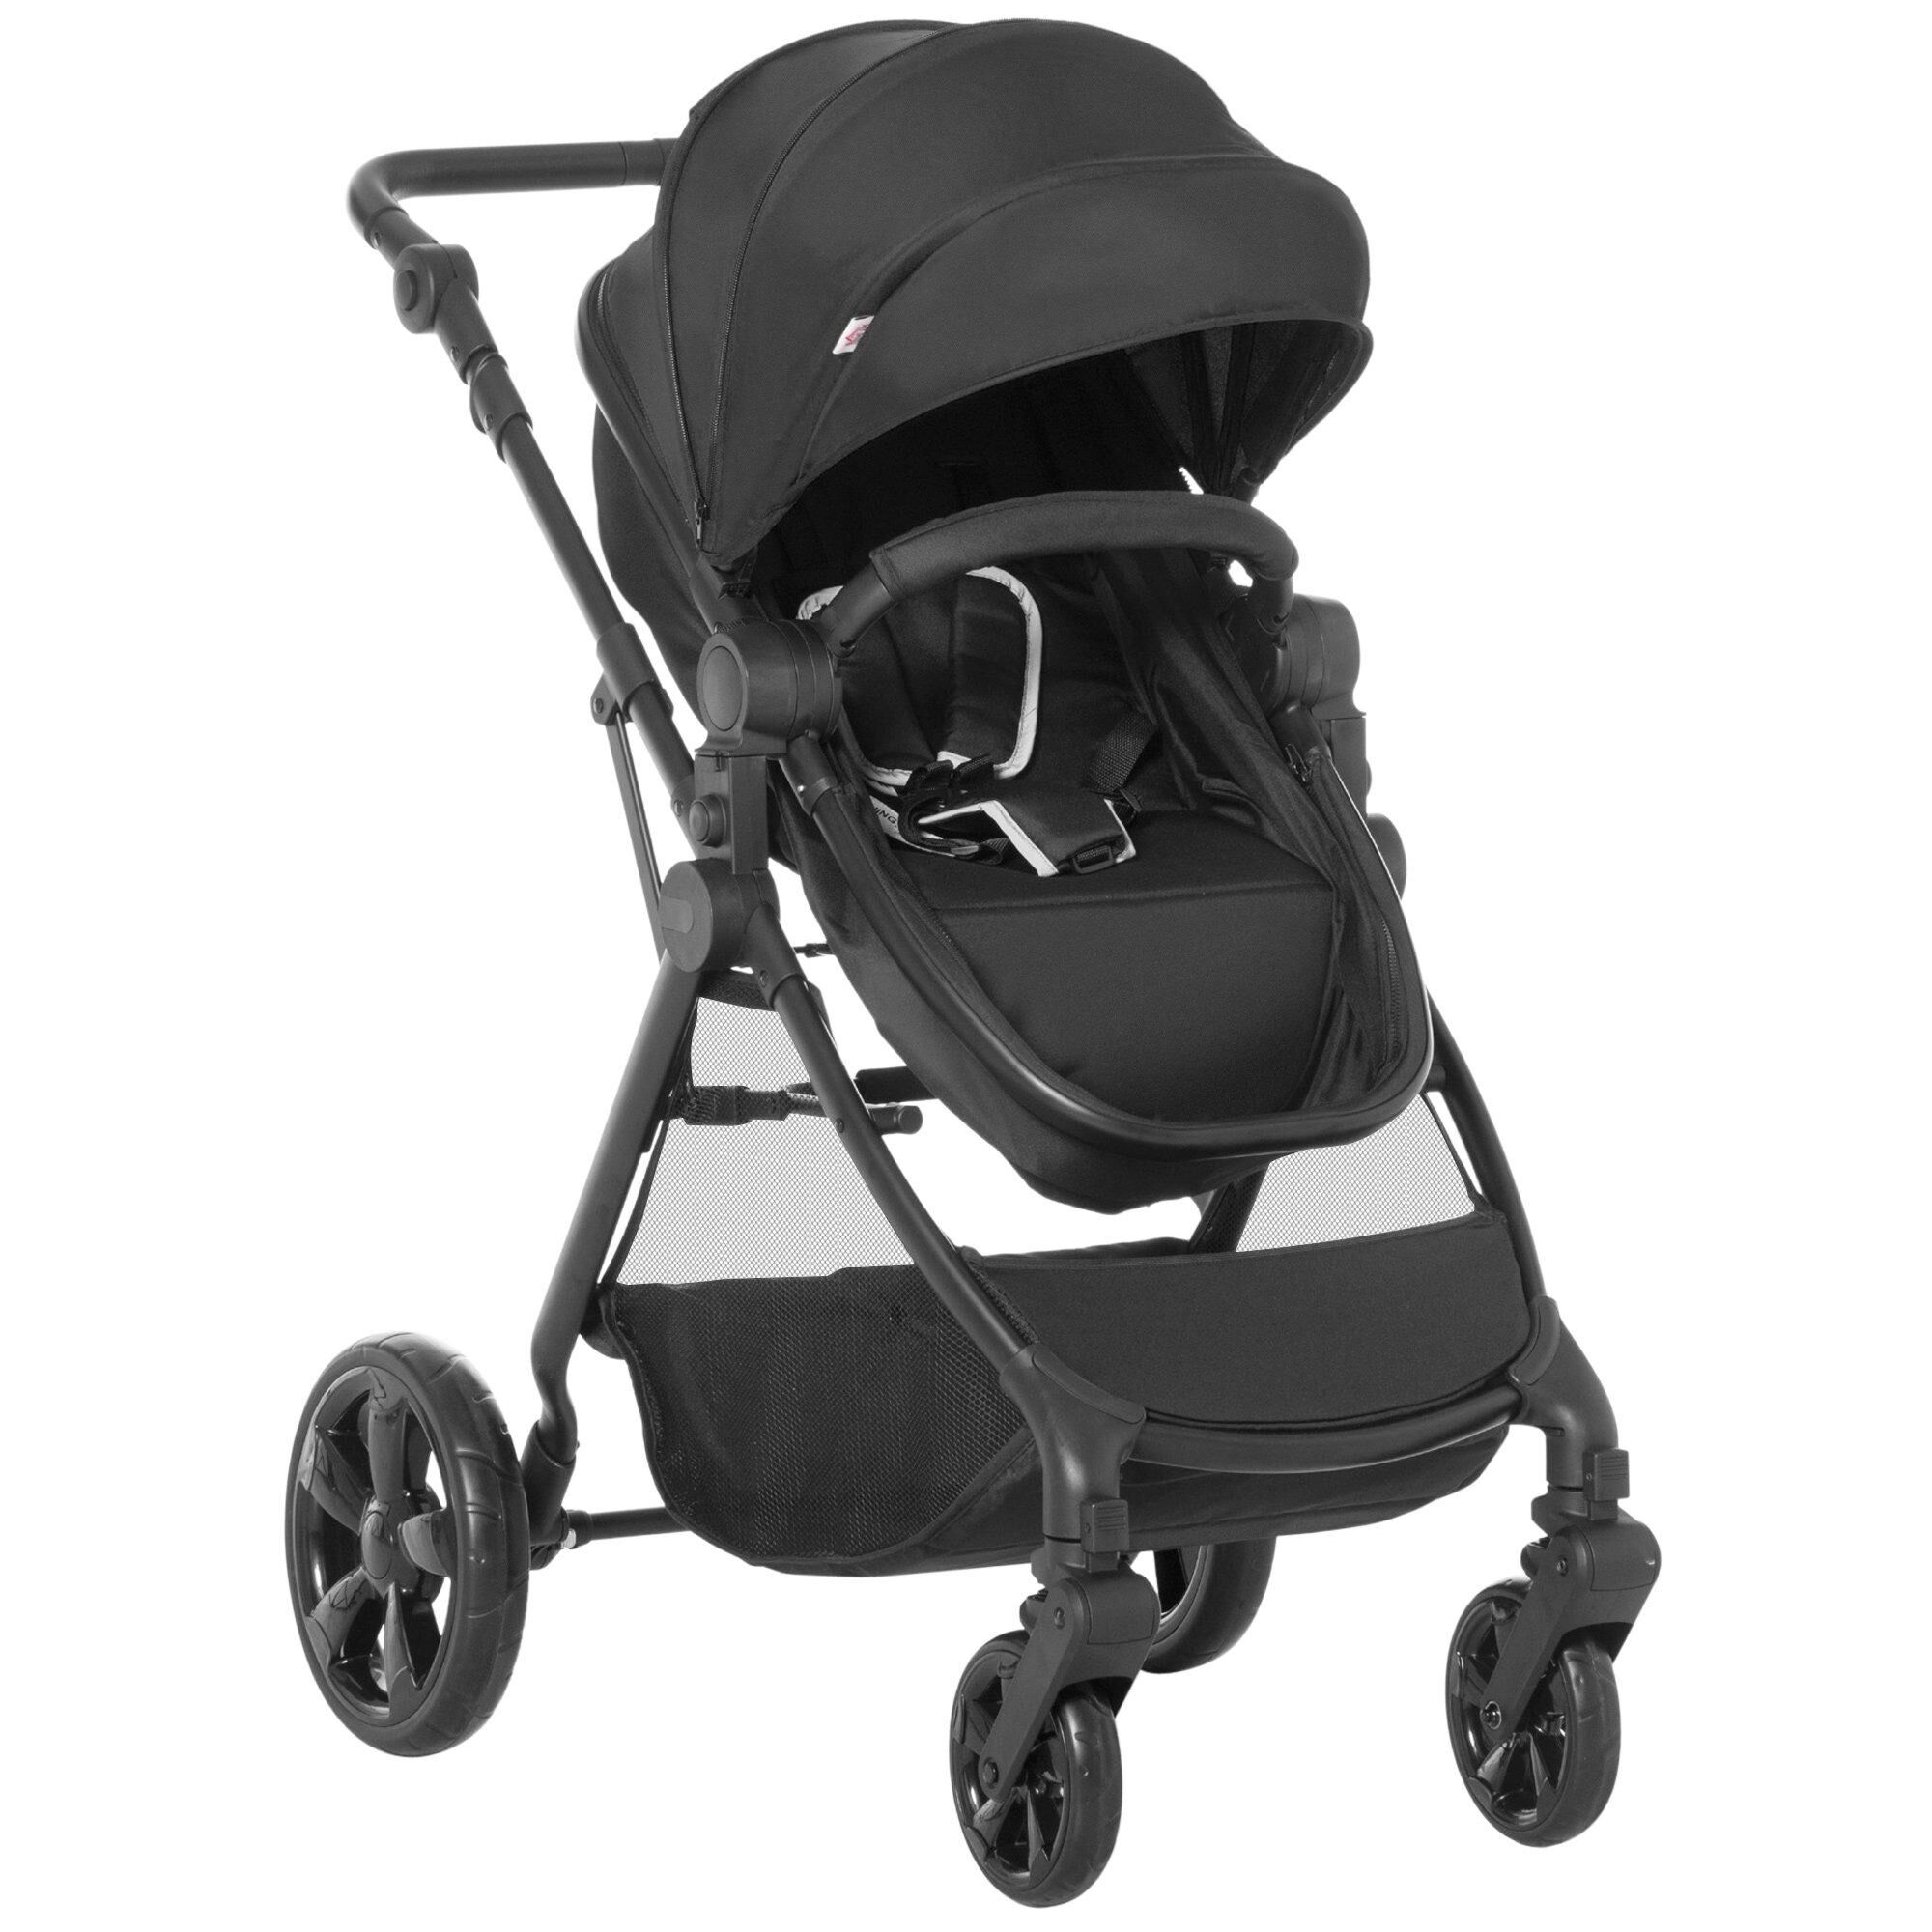 HOMCOM Foldable Travel Baby Stroller with Fully Reclining From Birth to 3 Years